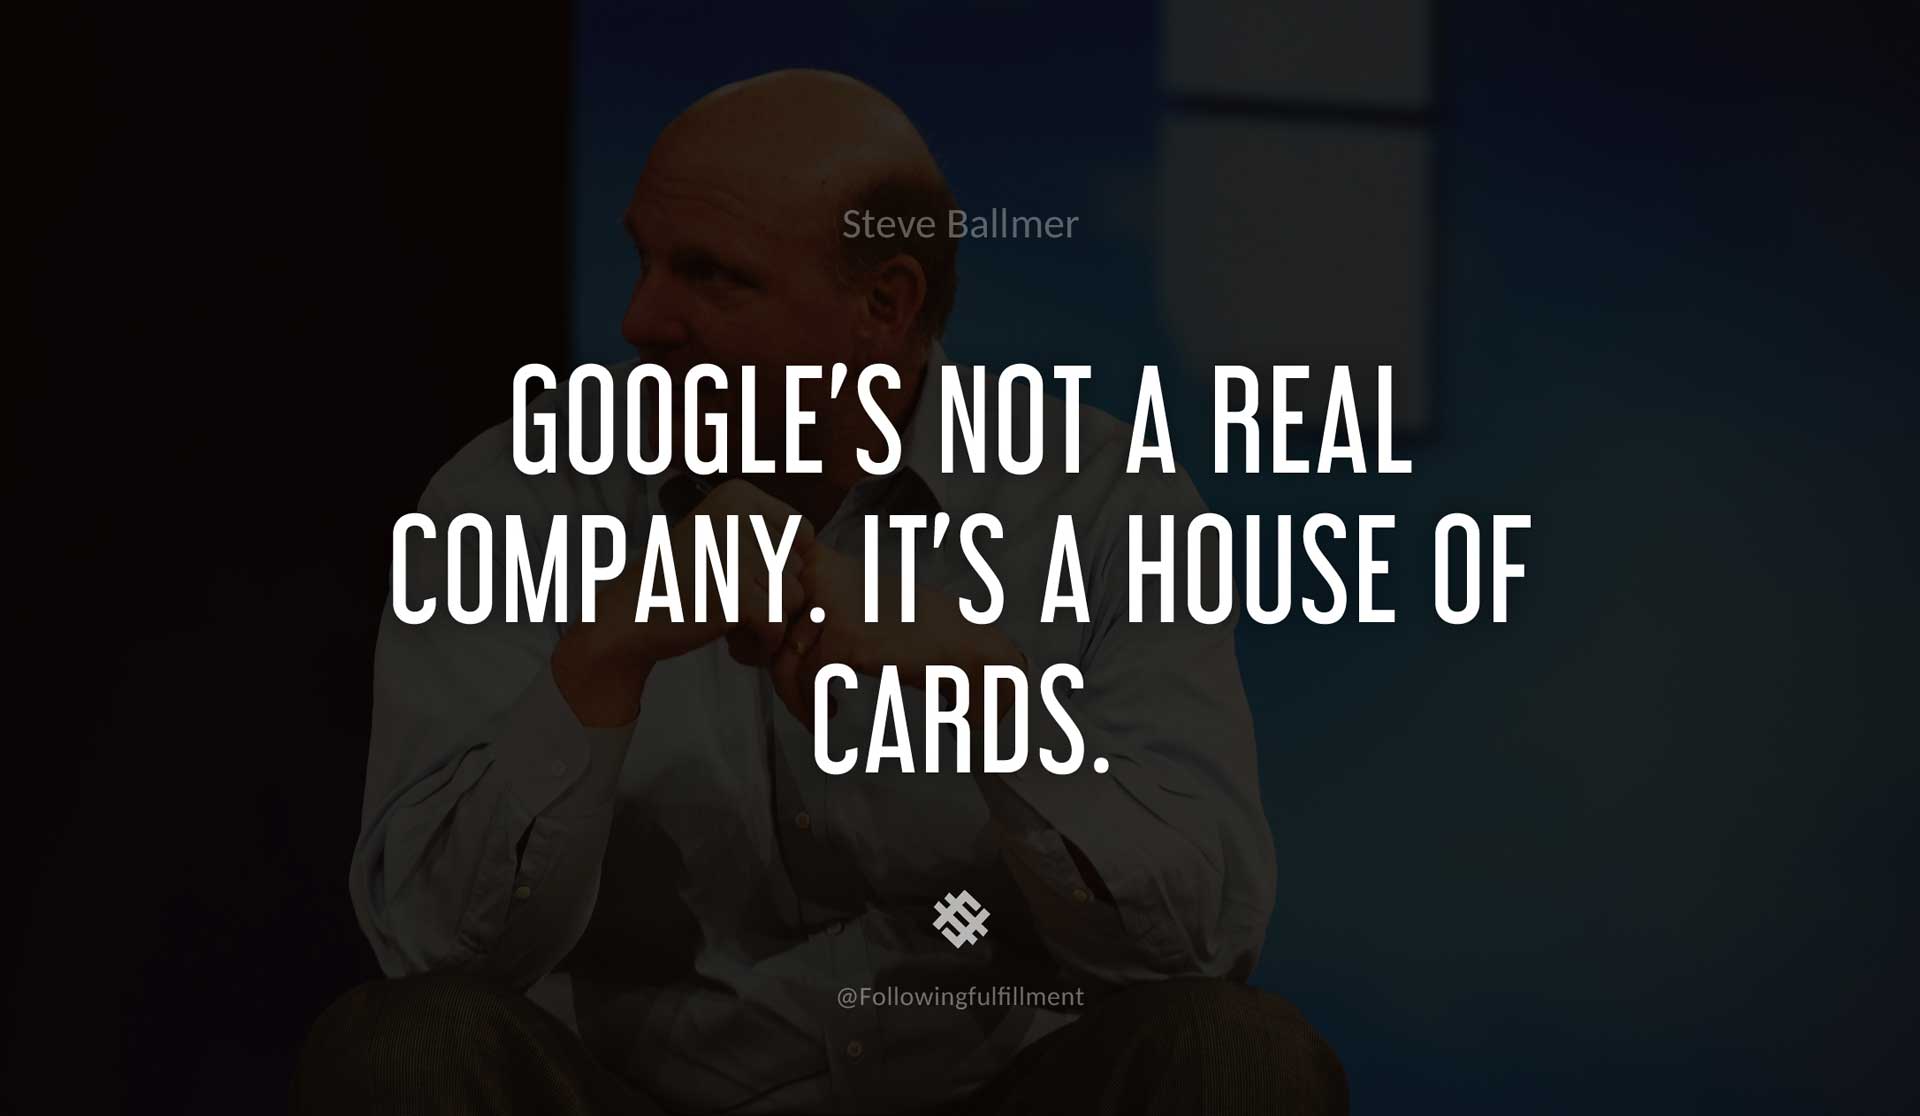 Google's-not-a-real-company.-It's-a-house-of-cards.-STEVE-BALLMER-Quote.jpg